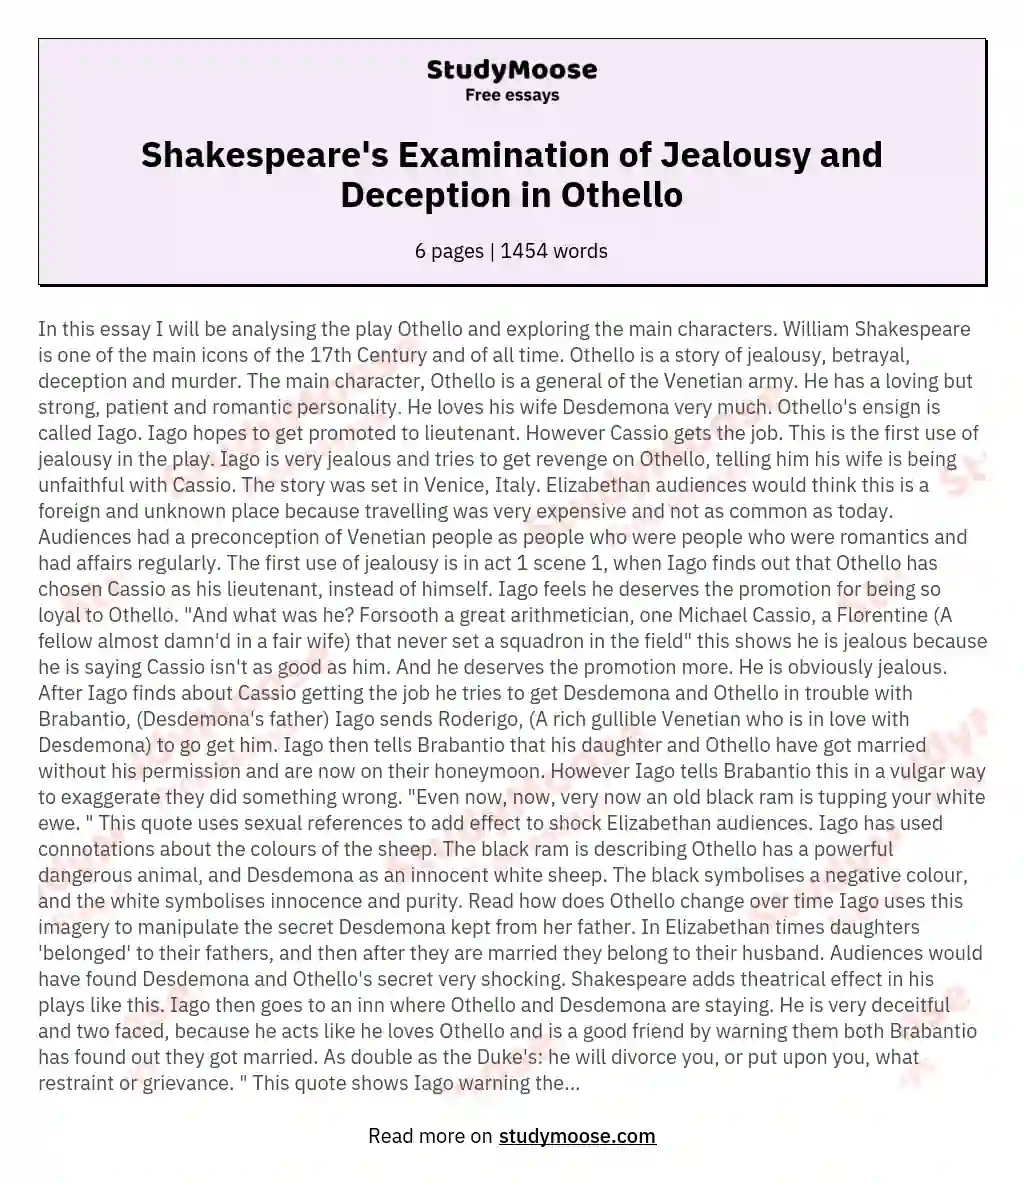 Shakespeare's Examination of Jealousy and Deception in Othello essay